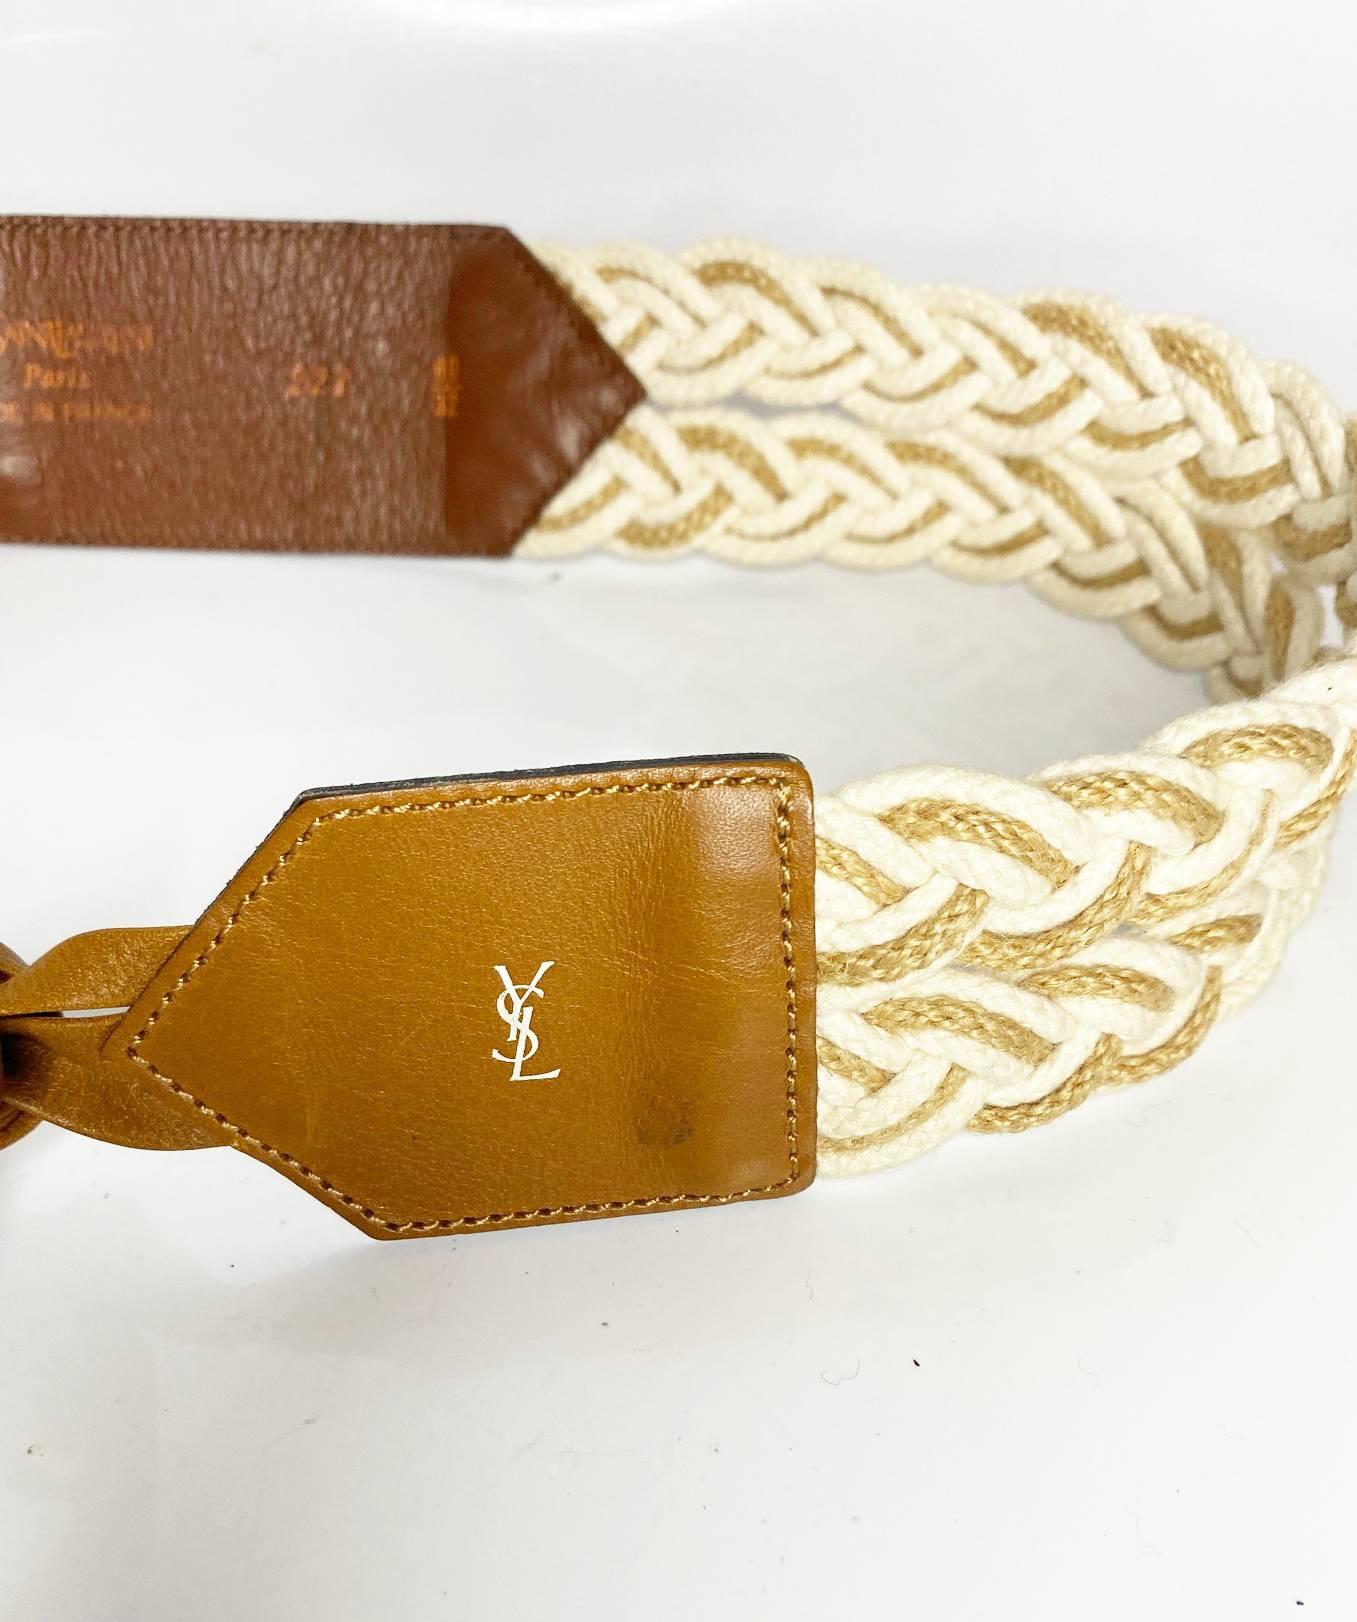 Yves Saint Laurent Leather and Cloth Plaited Brown tie belt This stylish tie belt is crafted from the highest quality leather and cloth, providing you with a timeless piece that you can wear for years to come. The detailed plaited design is perfect